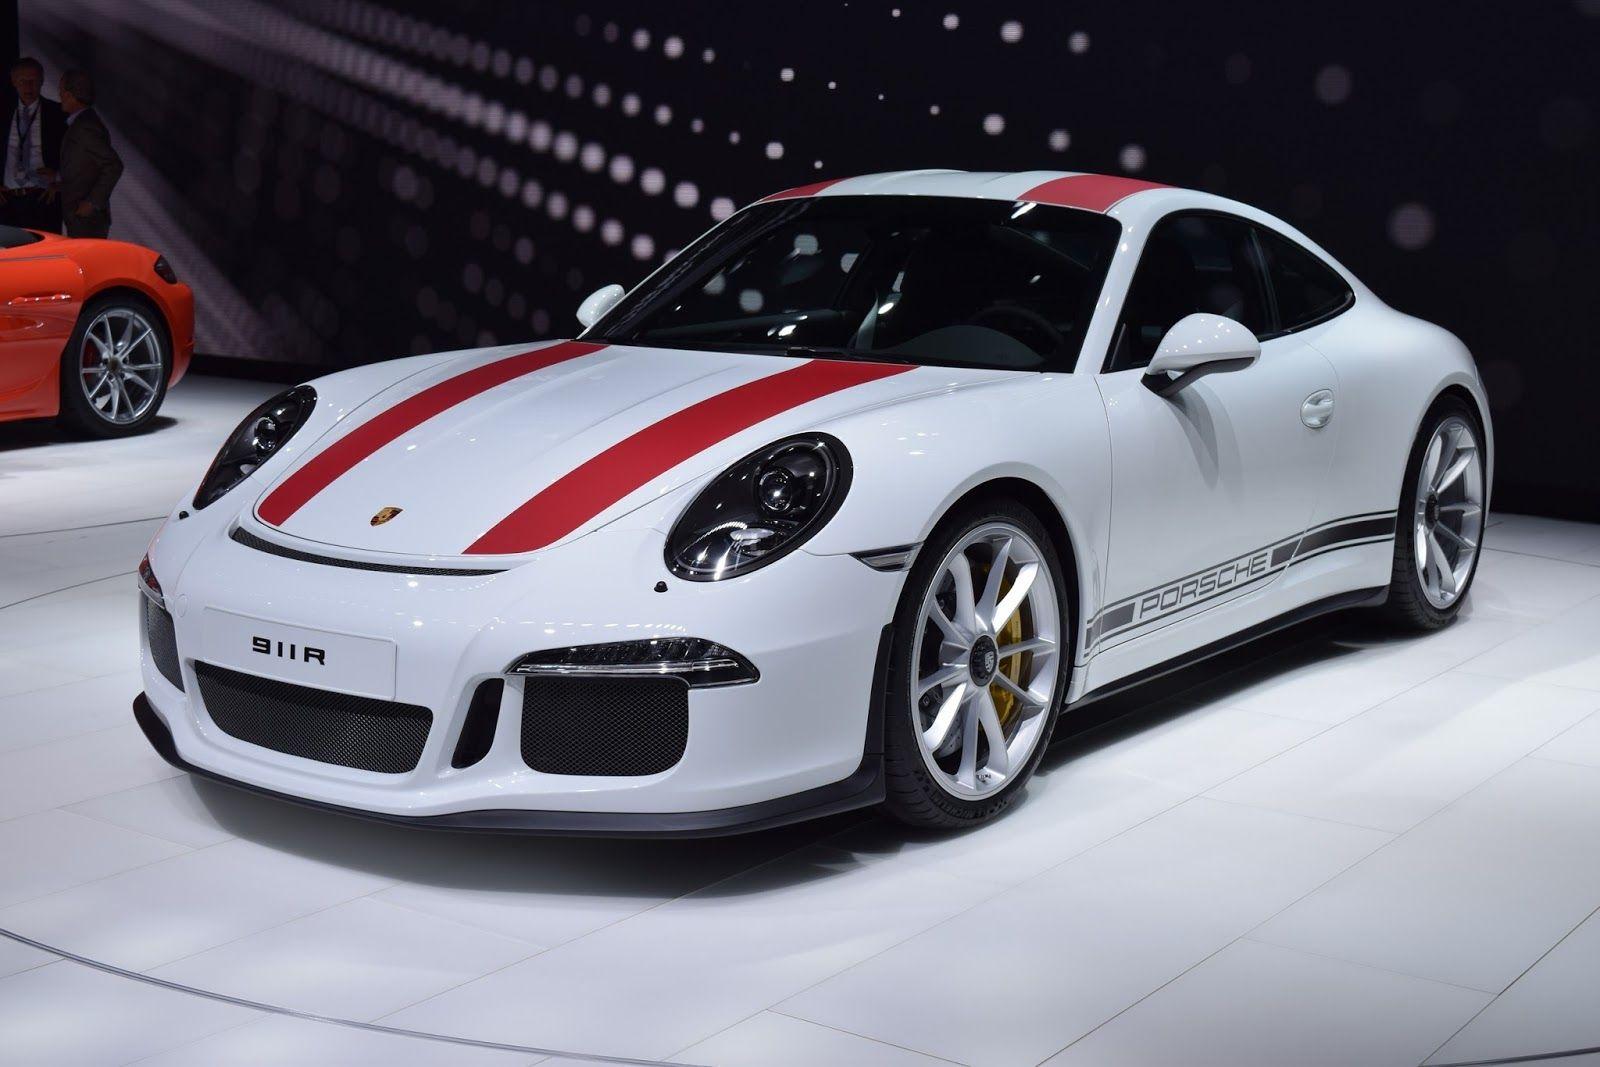 Porsche 911 R: Proof Stripes Go With Everything